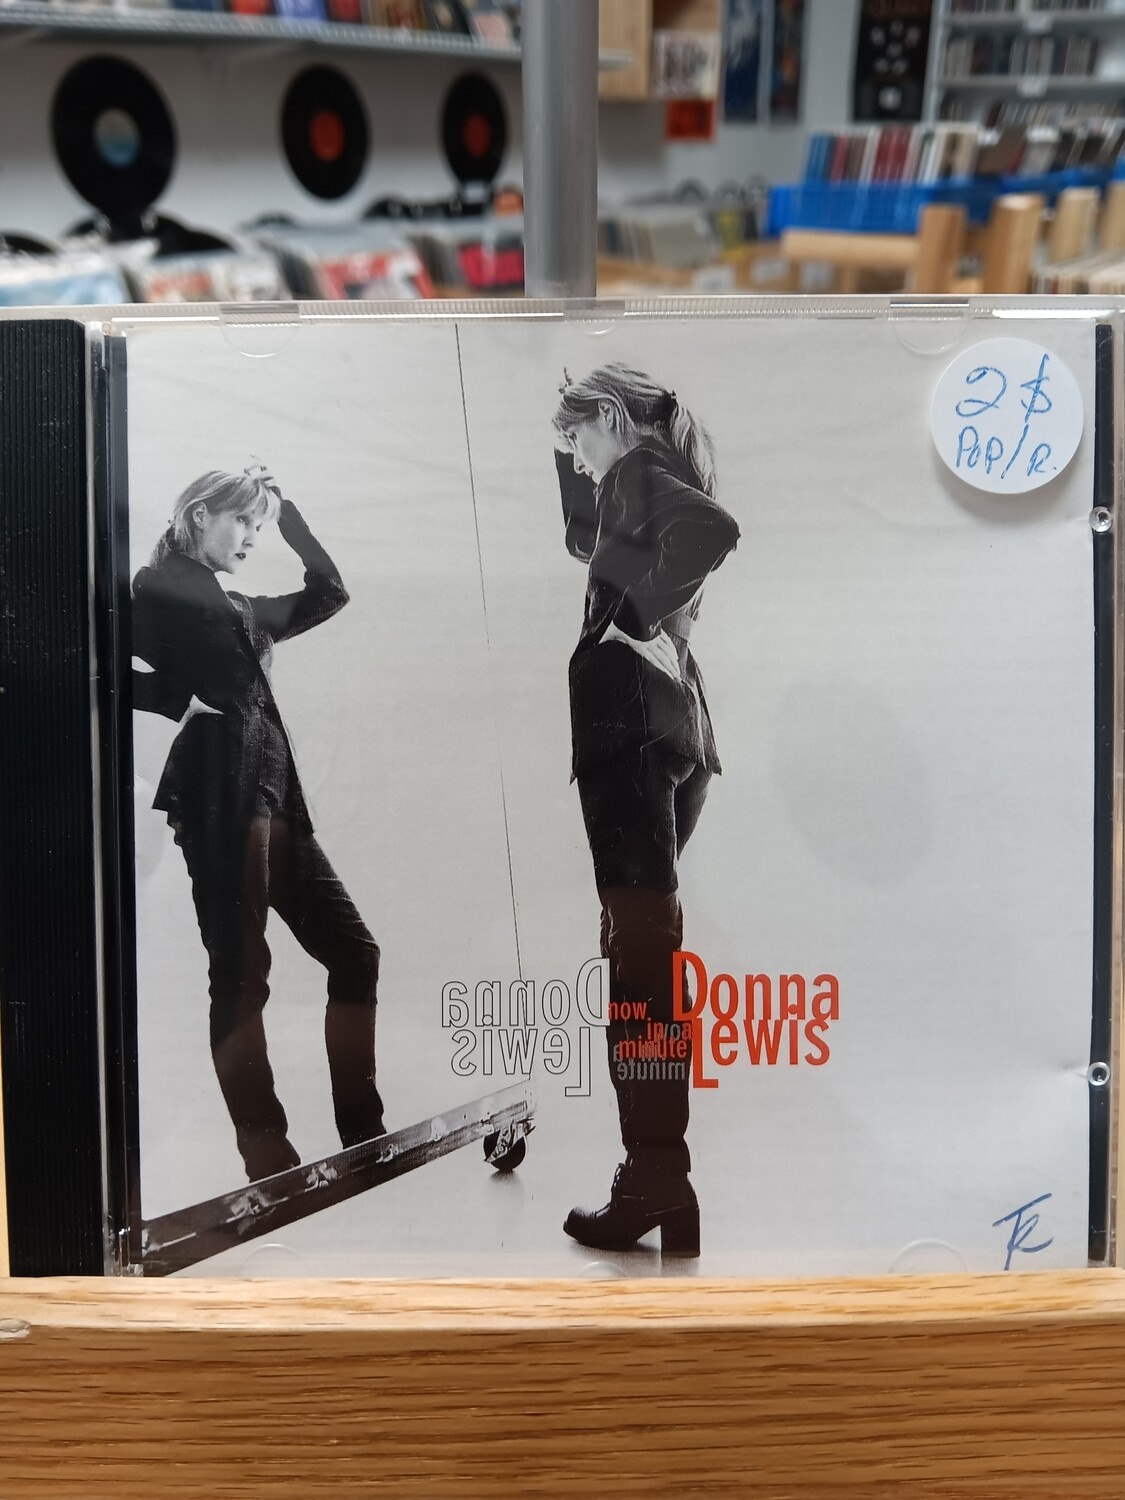 DONNA LEWIS - Now in a minute (CD)